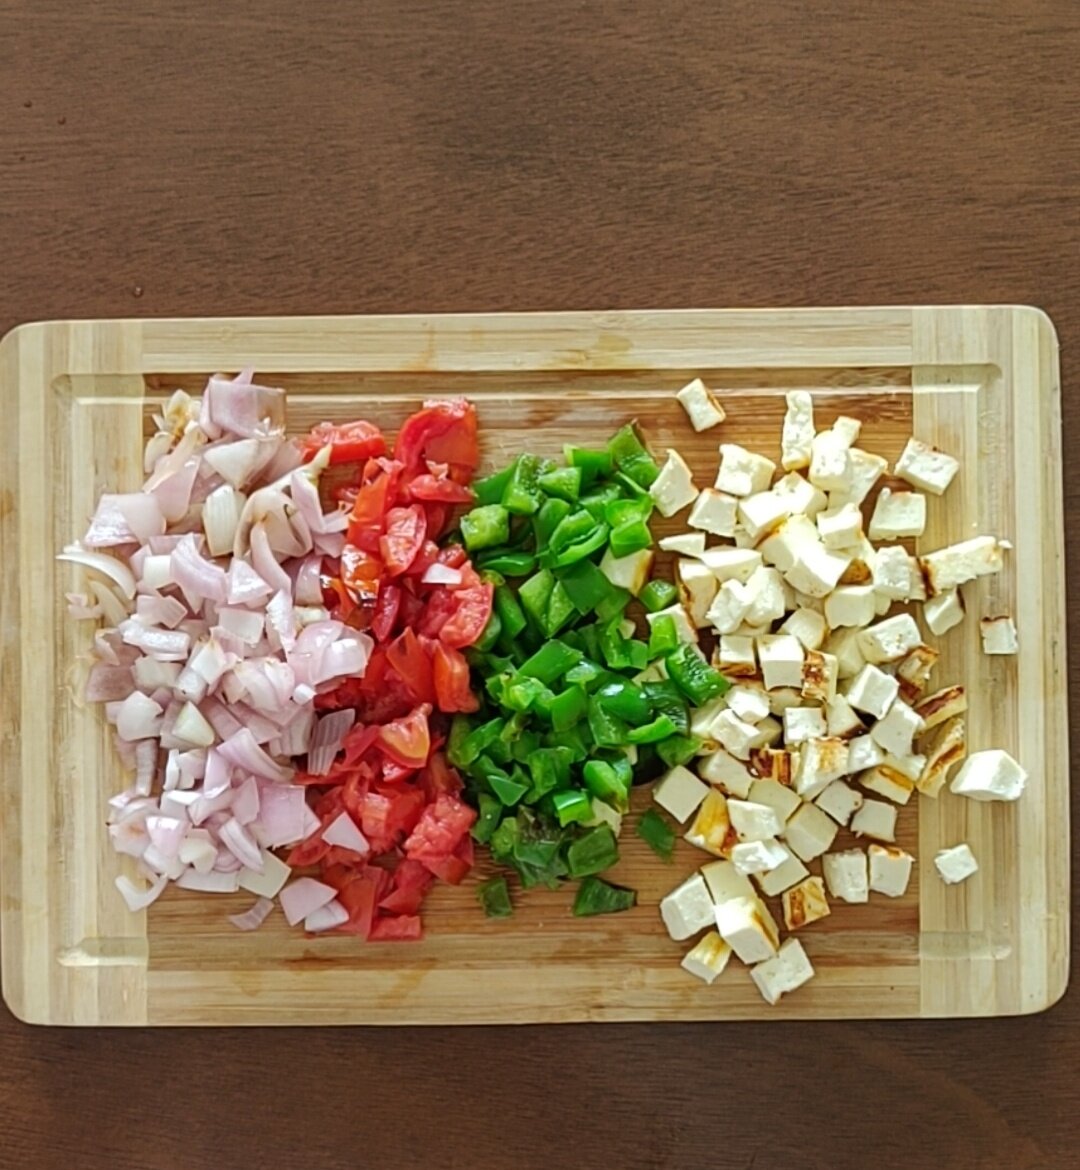 Chopping grilled vegetables and paneer.